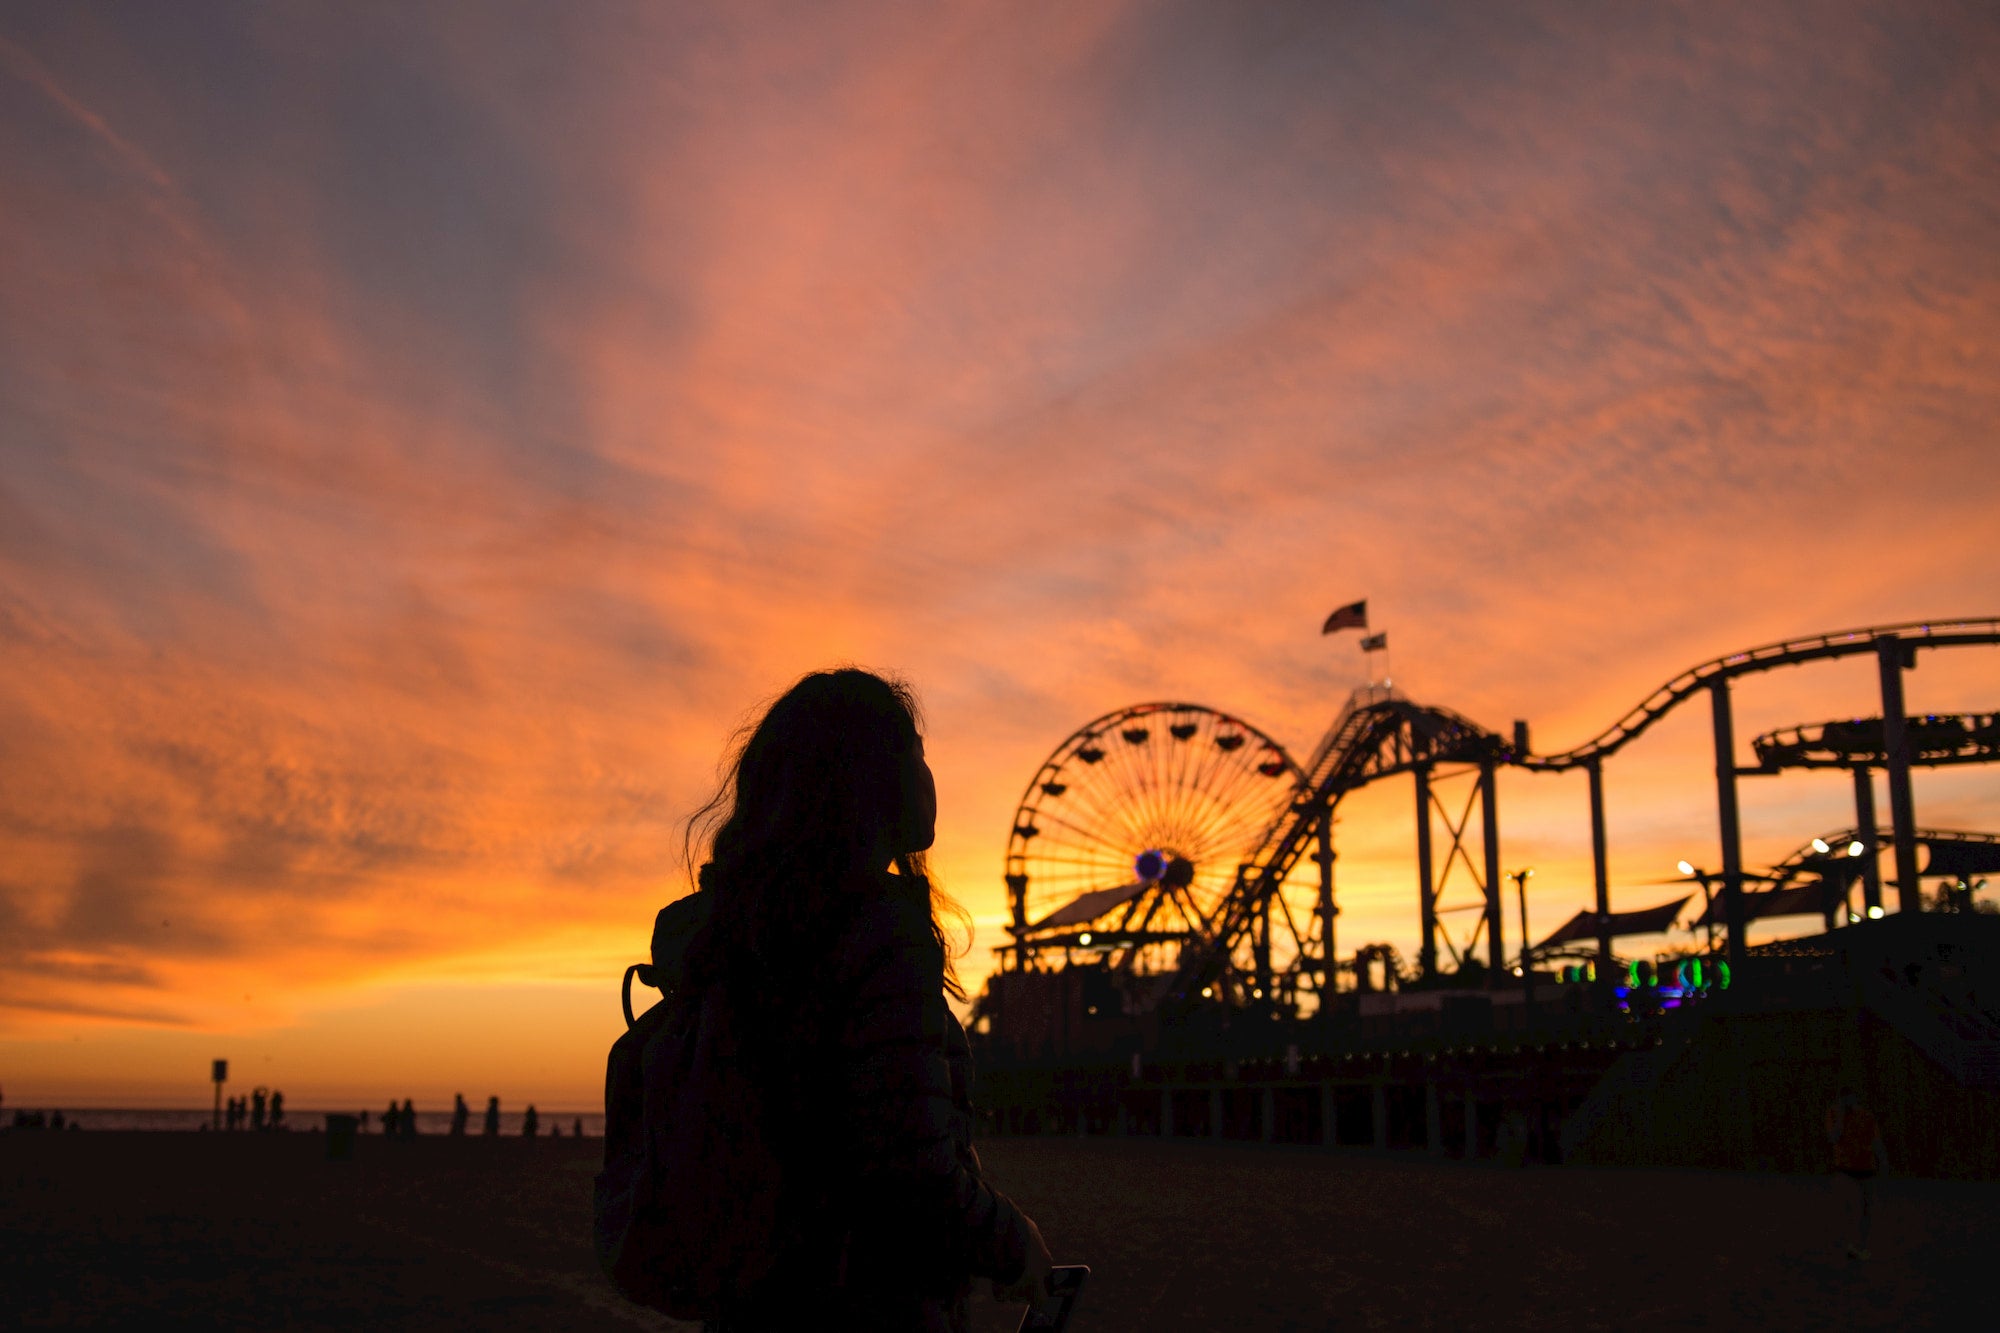 Silhouette of a woman at sunset on a pier with a ferris wheel.